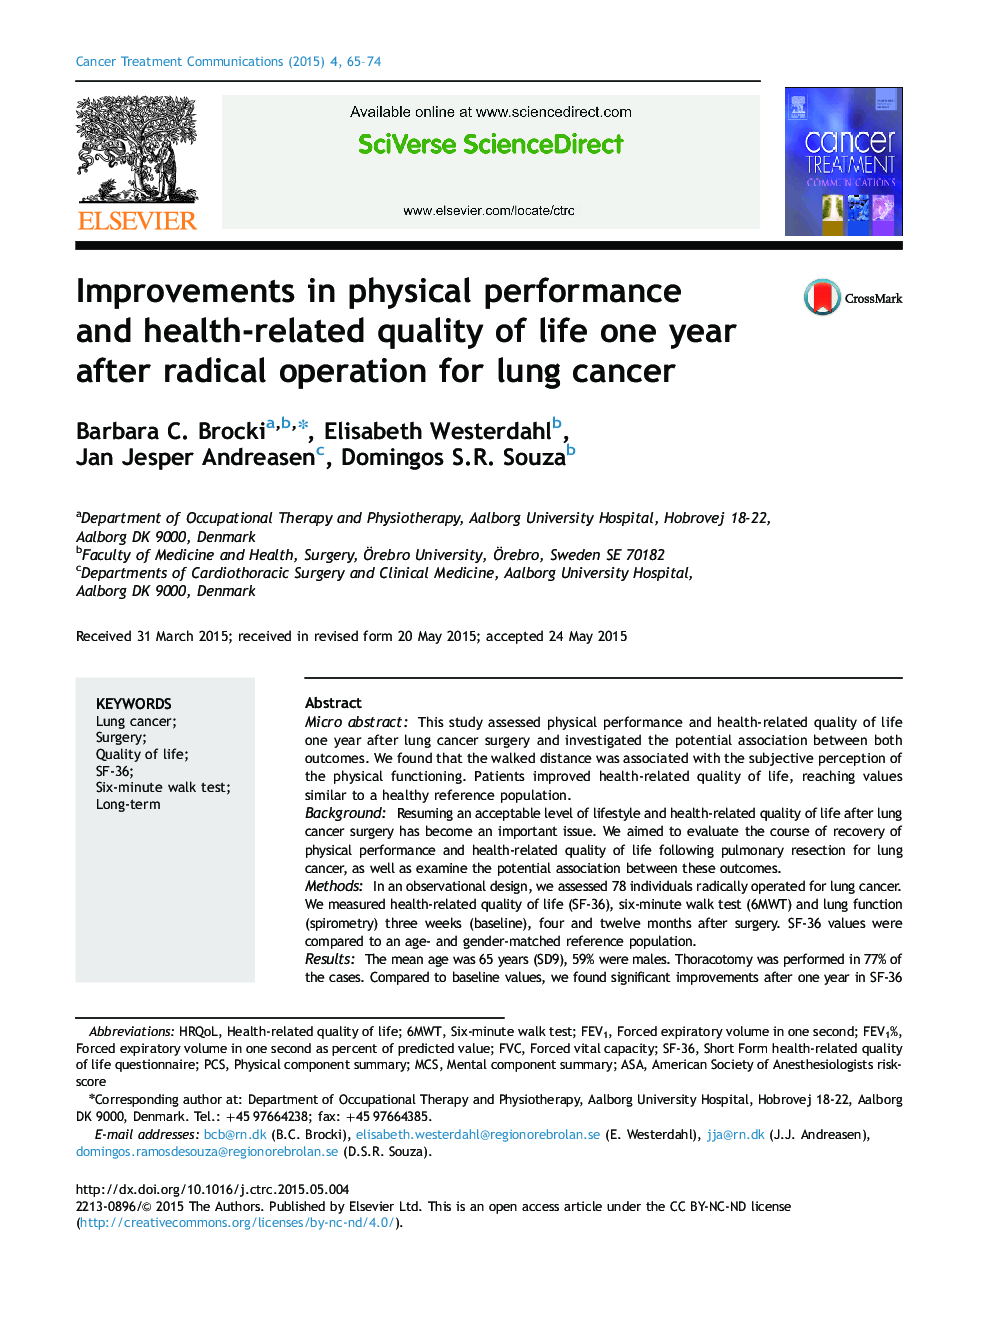 Improvements in physical performance and health-related quality of life one year after radical operation for lung cancer